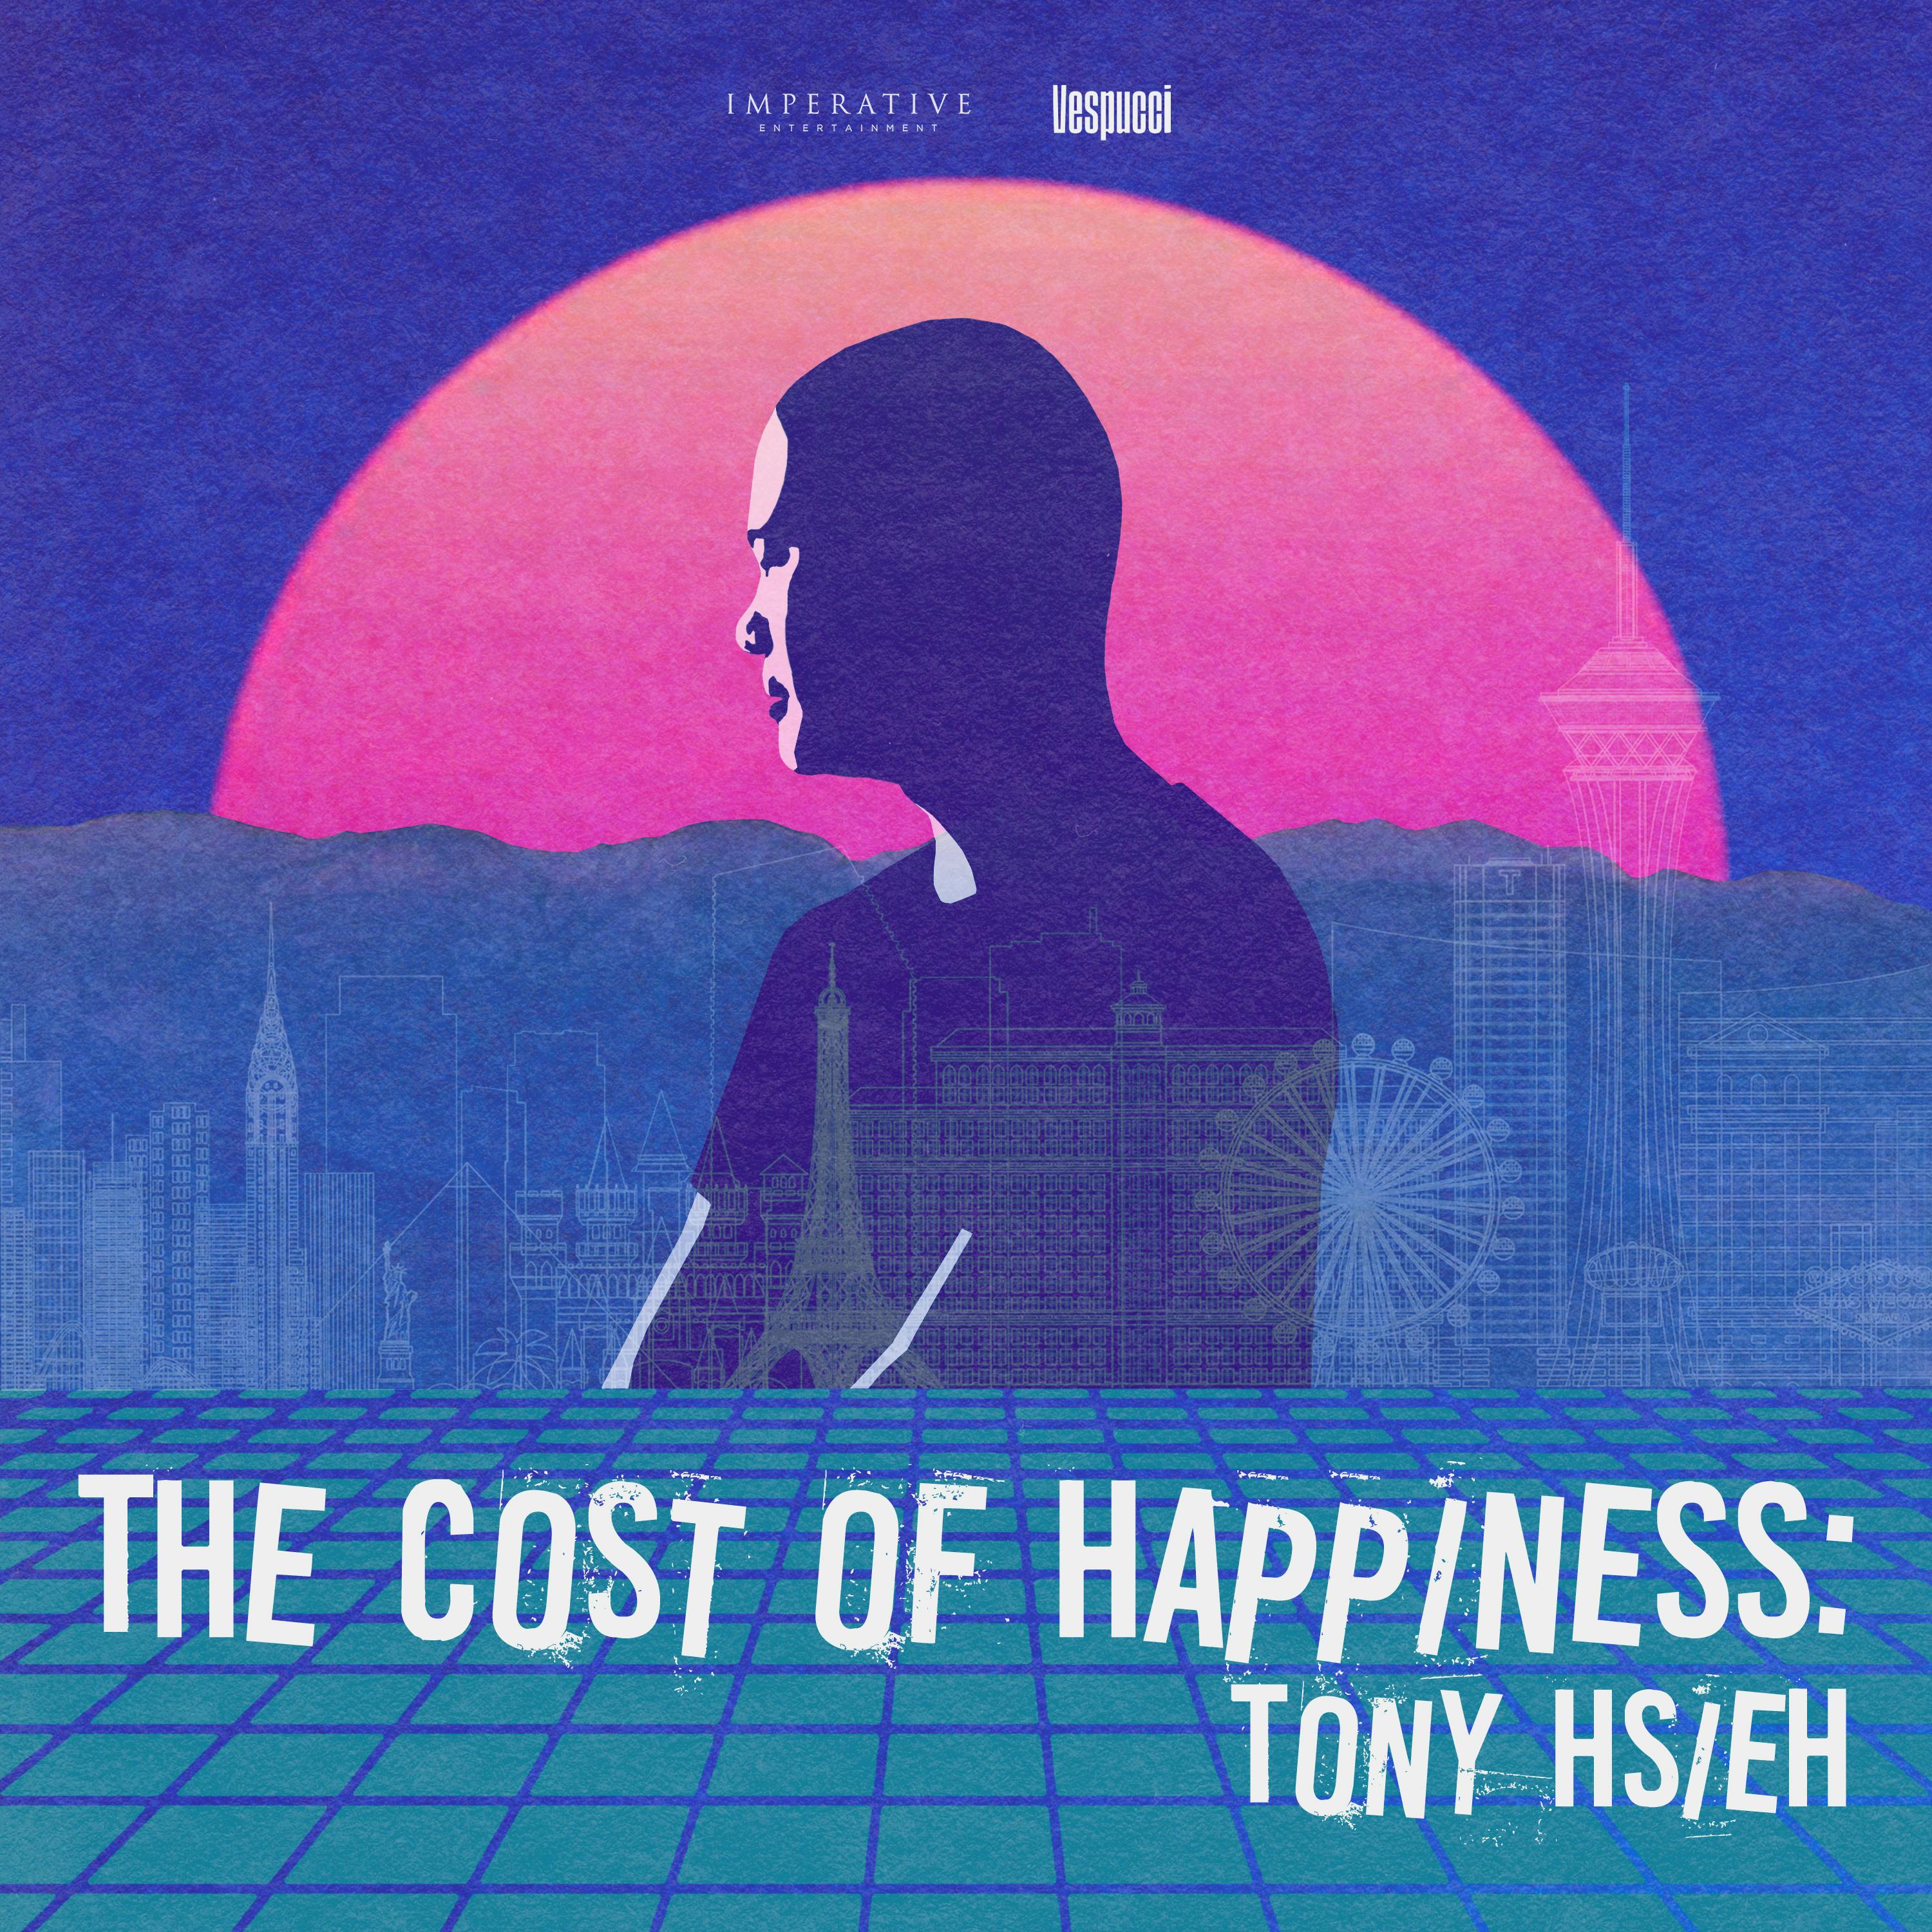 The Cost of Happiness: Tony Hsieh podcast show image